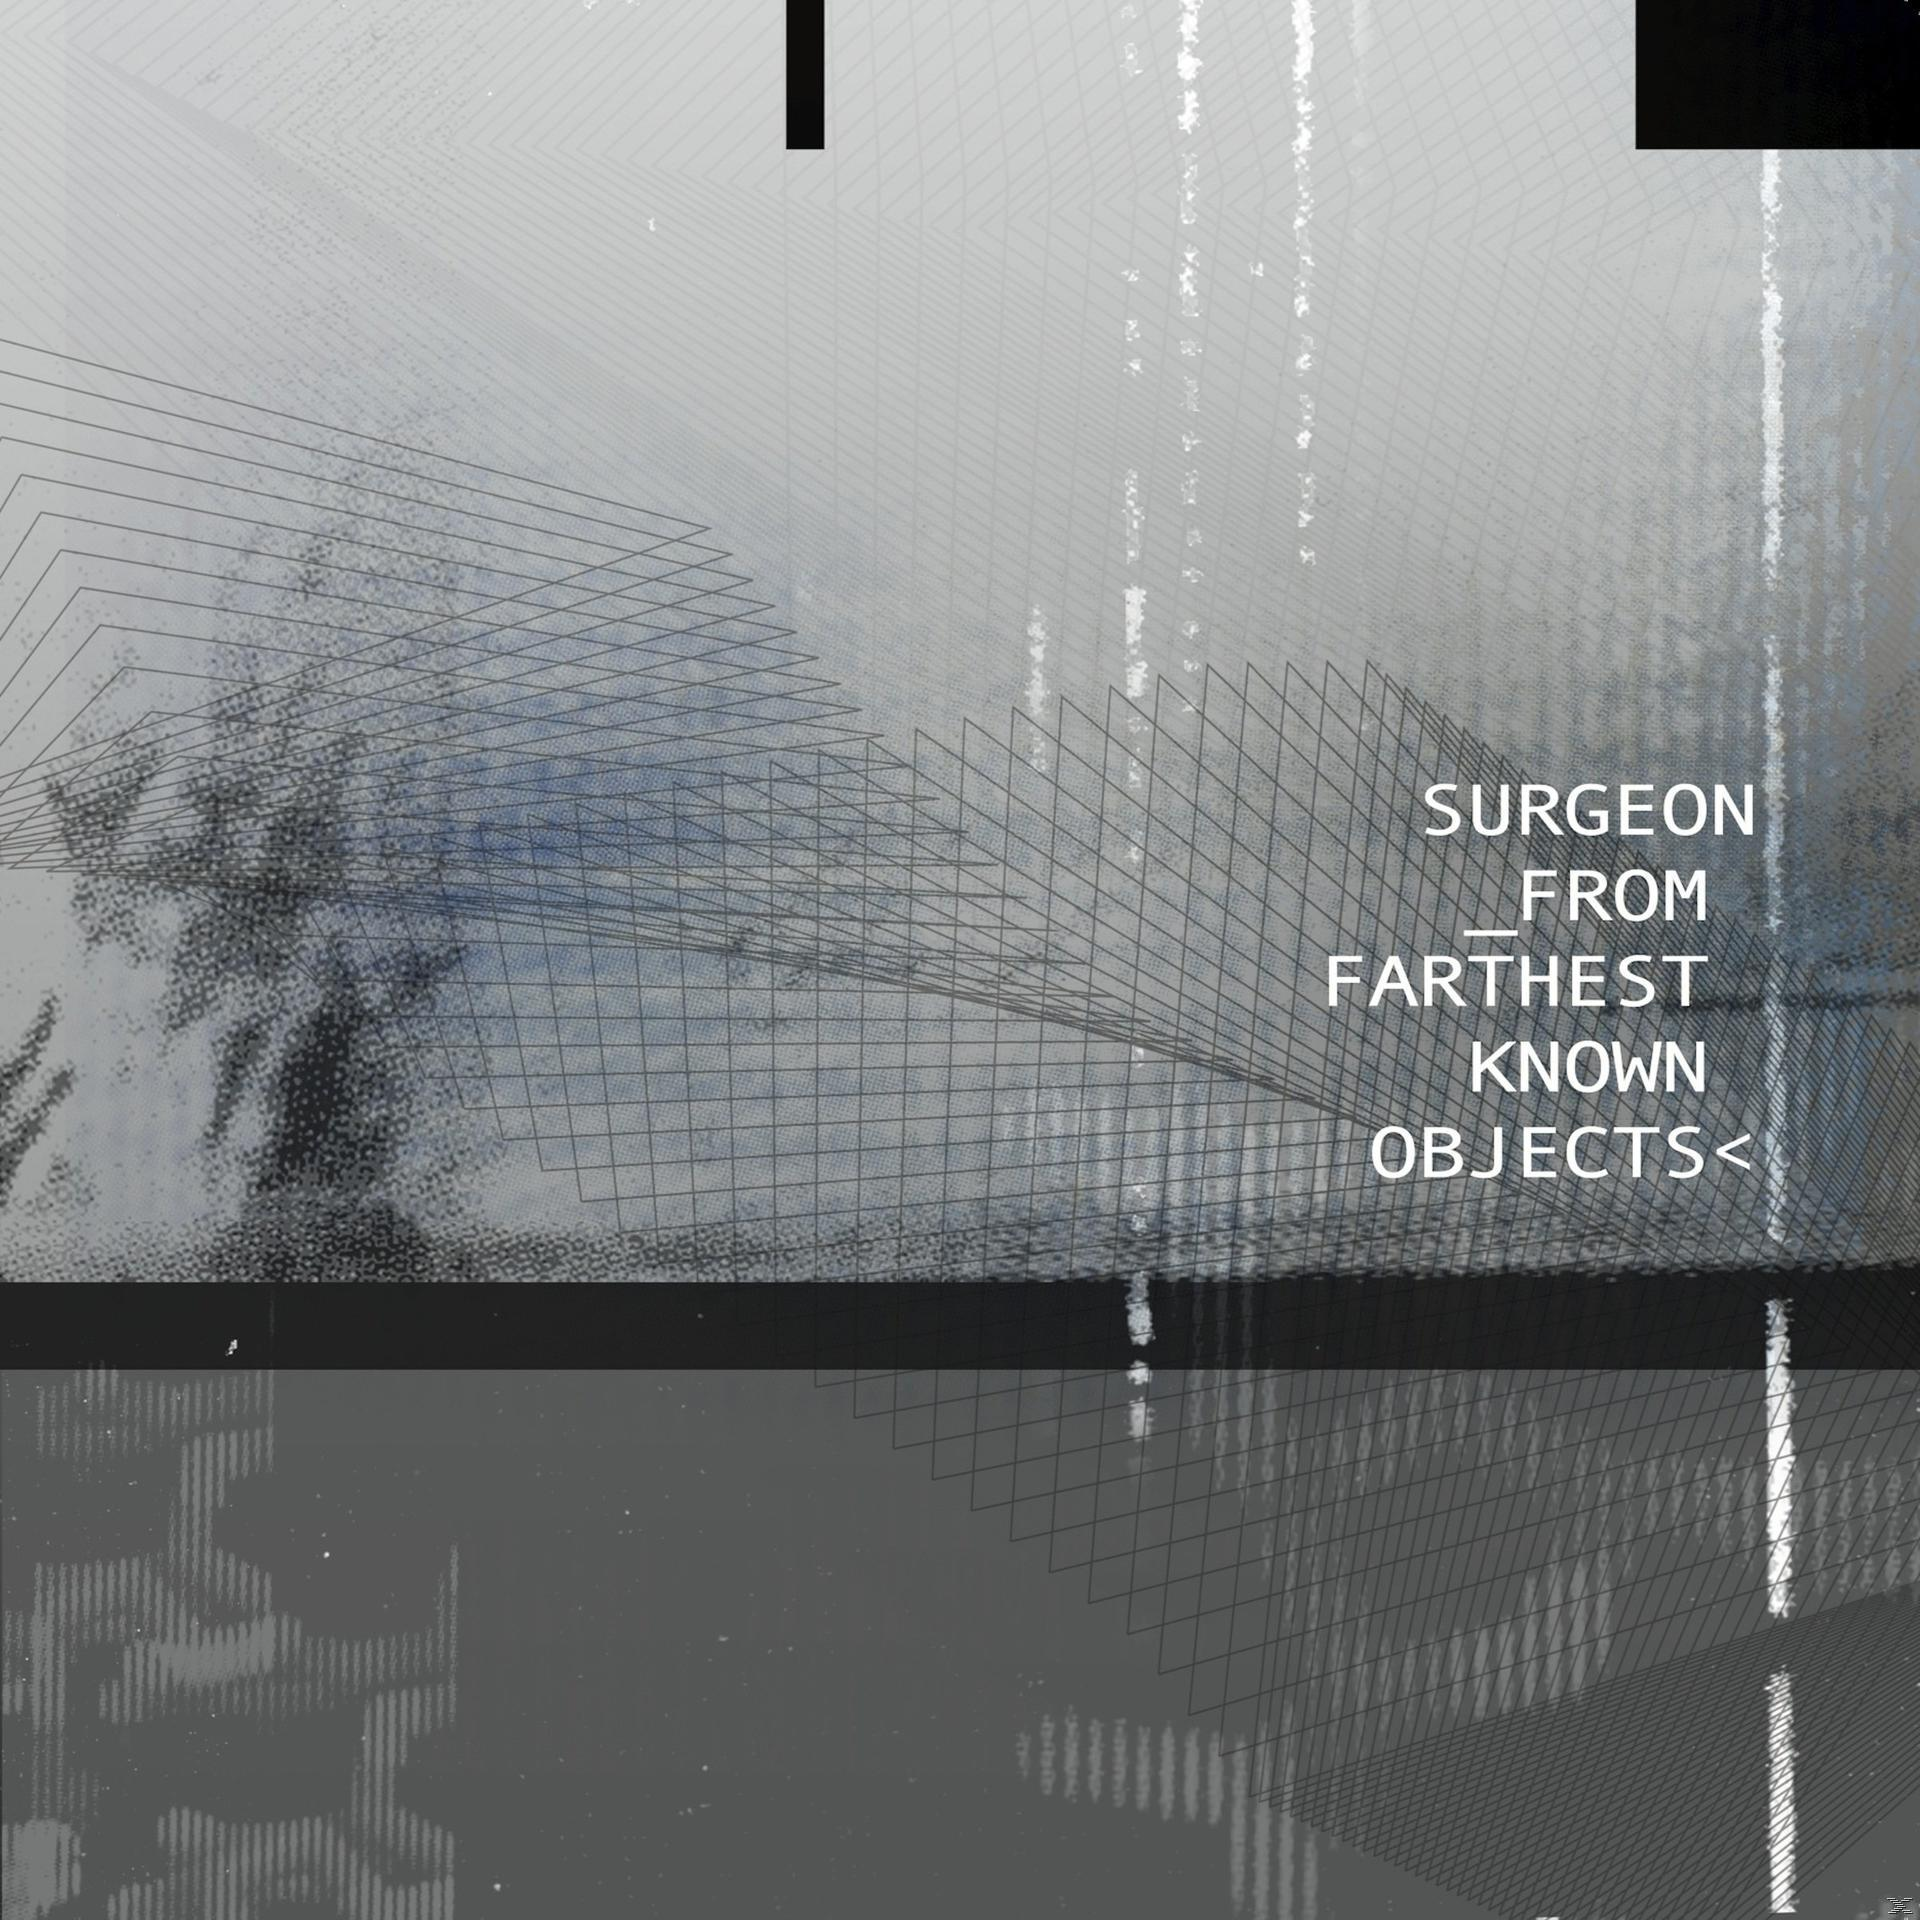 Surgeon From - Objects Known Farthest (CD) -